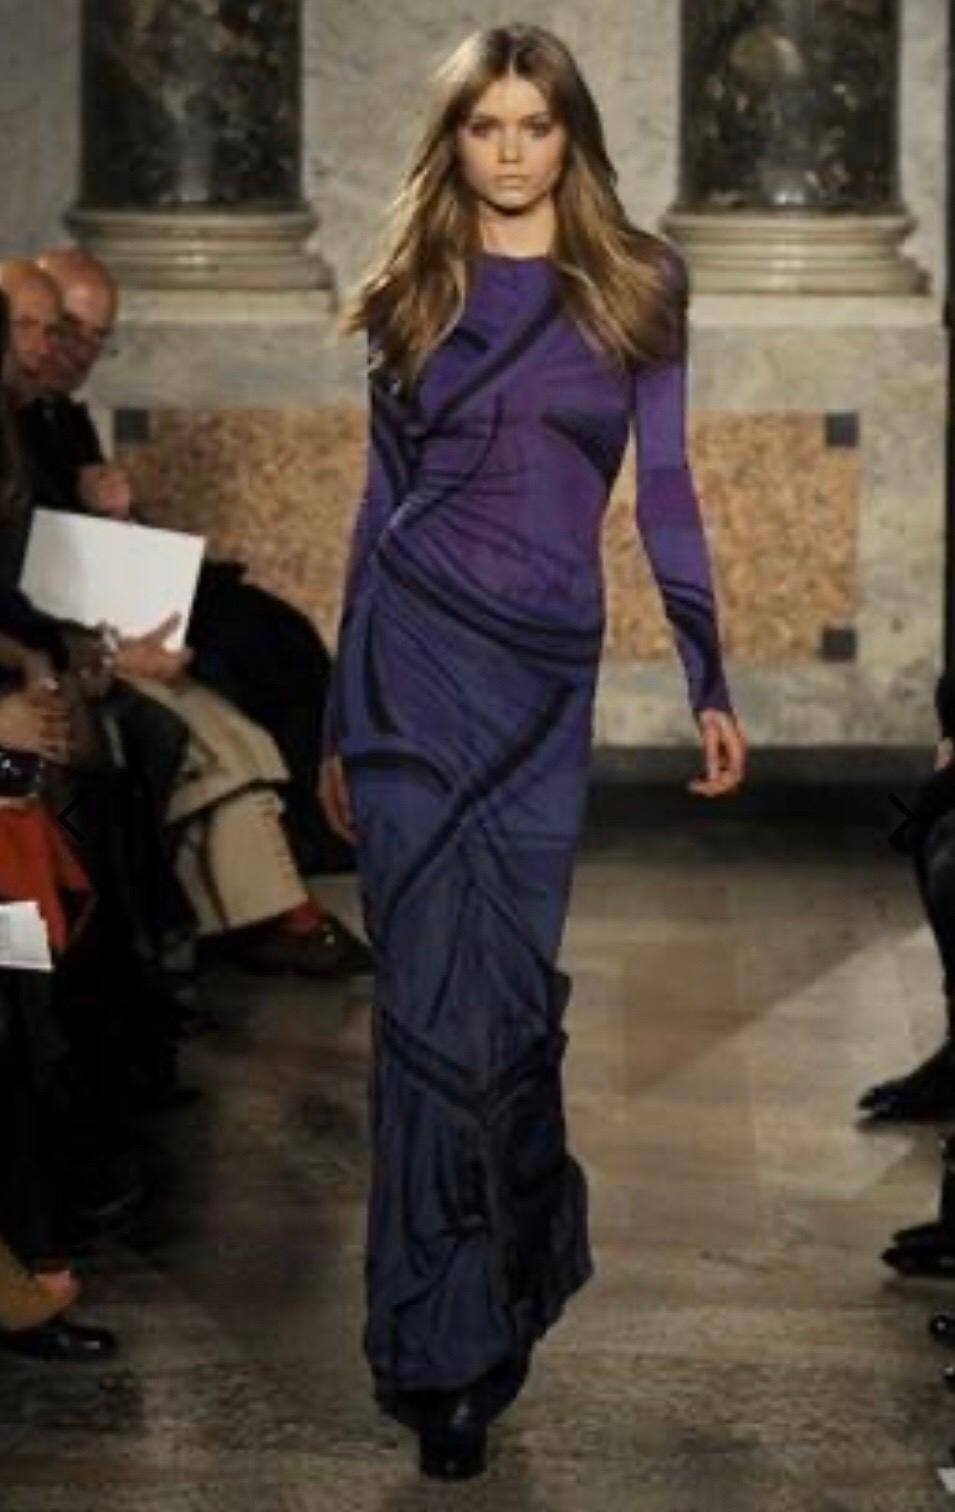 All eyes on you in this Pucci gown! From Peter Dundas 2010 Fall Ready-to-Wear collection, this floor length mermaid gown features long sleeves and a key hole open back. Electric purple ombre to grey/blue with the iconic pucci print. 
Size 36 Italian